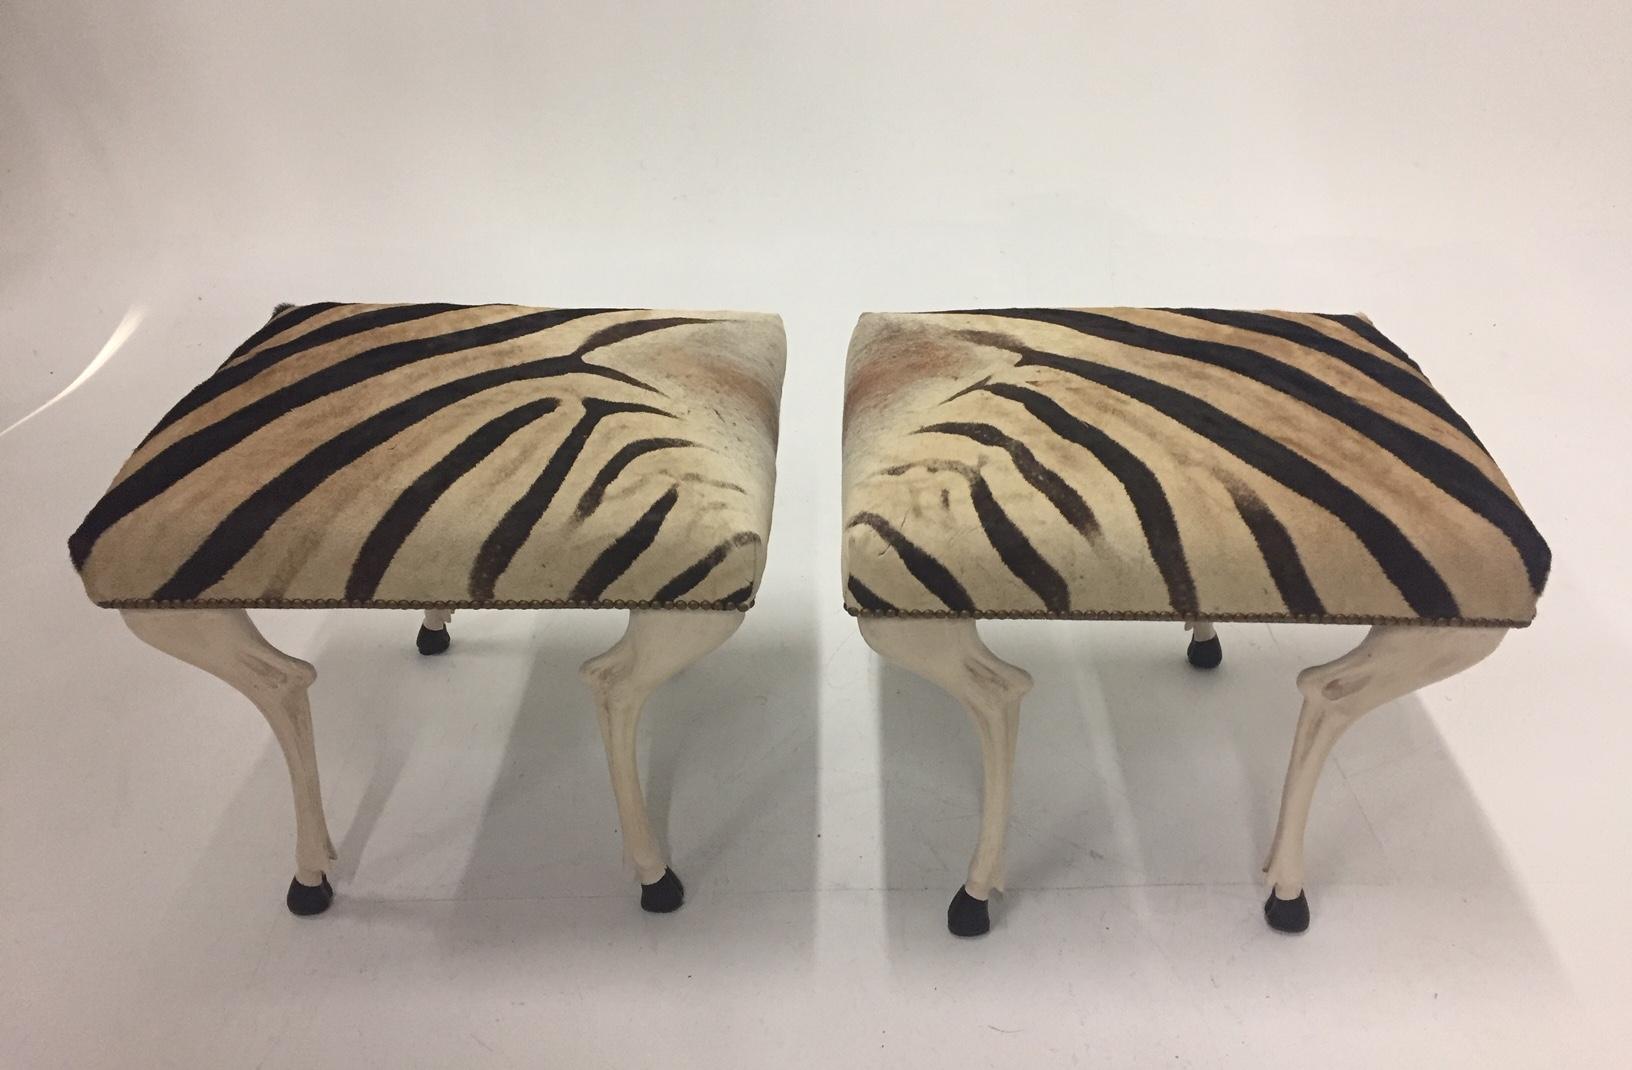 Wonderfully designed custom zebra ottomans having sculptural elegant painted wood legs that take their inspiration from a graceful hoofed animal, expertly upholstered in authentic zebra hide and finished with French hobnails. Color palette is cream